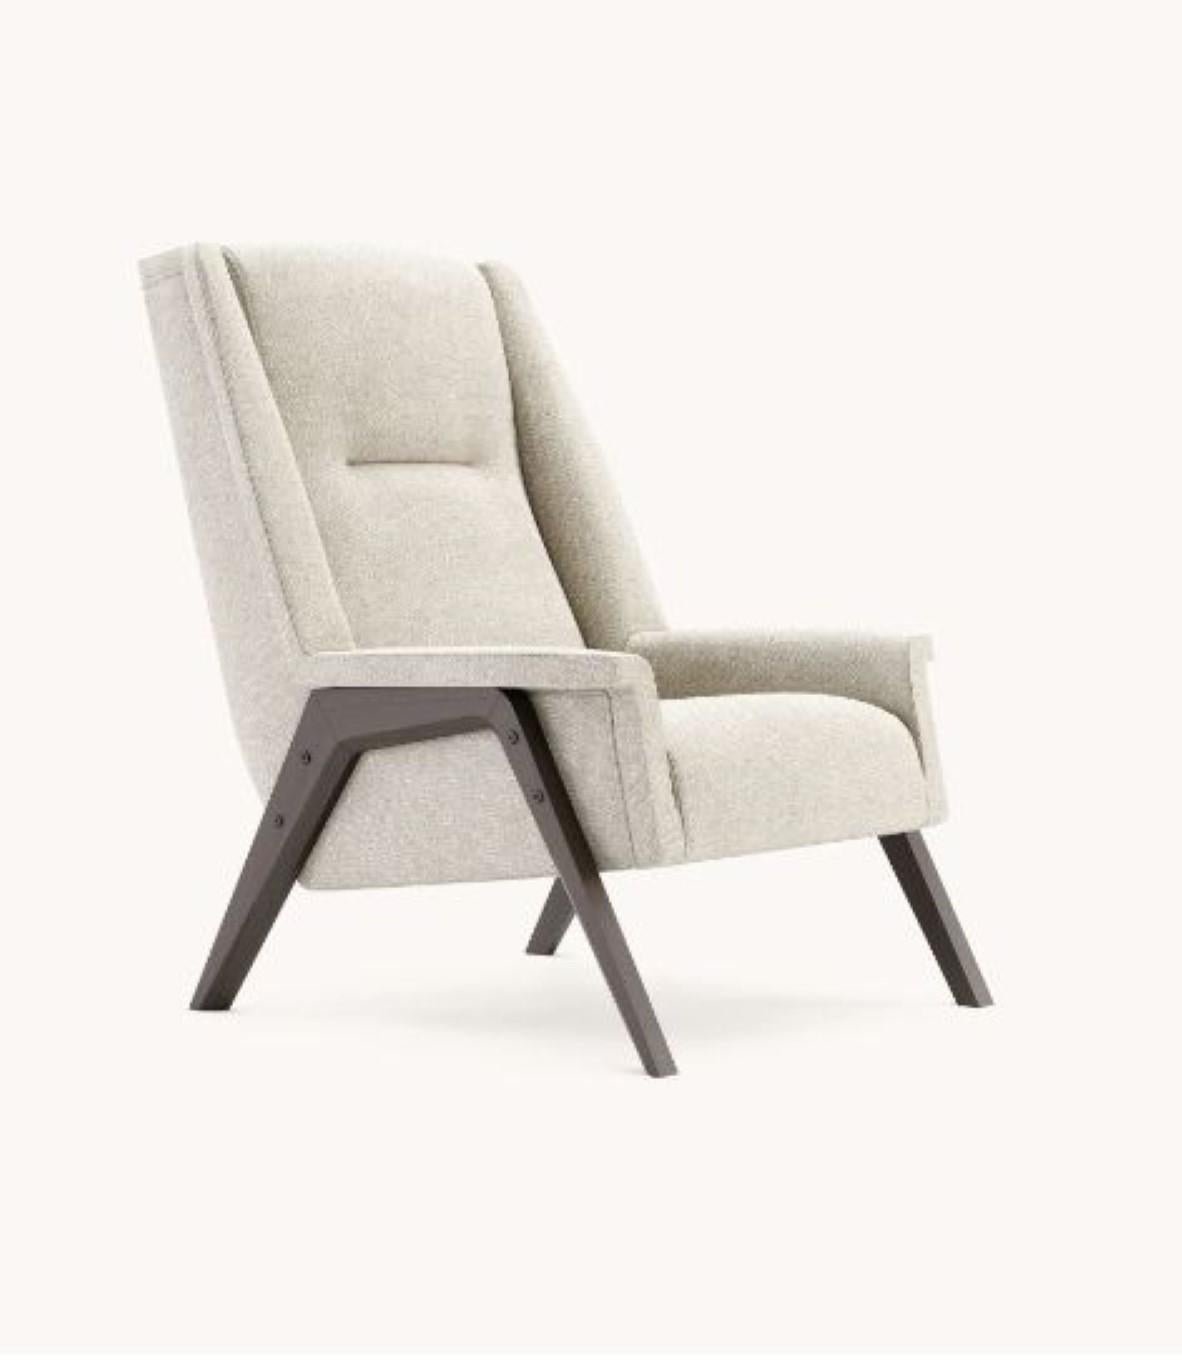 Greta H armchair by Domkapa
Materials: Solid wood: Fumé stained beech, upholstery. 
Dimensions: W 73 x D 86 x H 105 cm. 
Also available in different materials.

Greta armchair is proof that aesthetics and ergonomics when combined, result